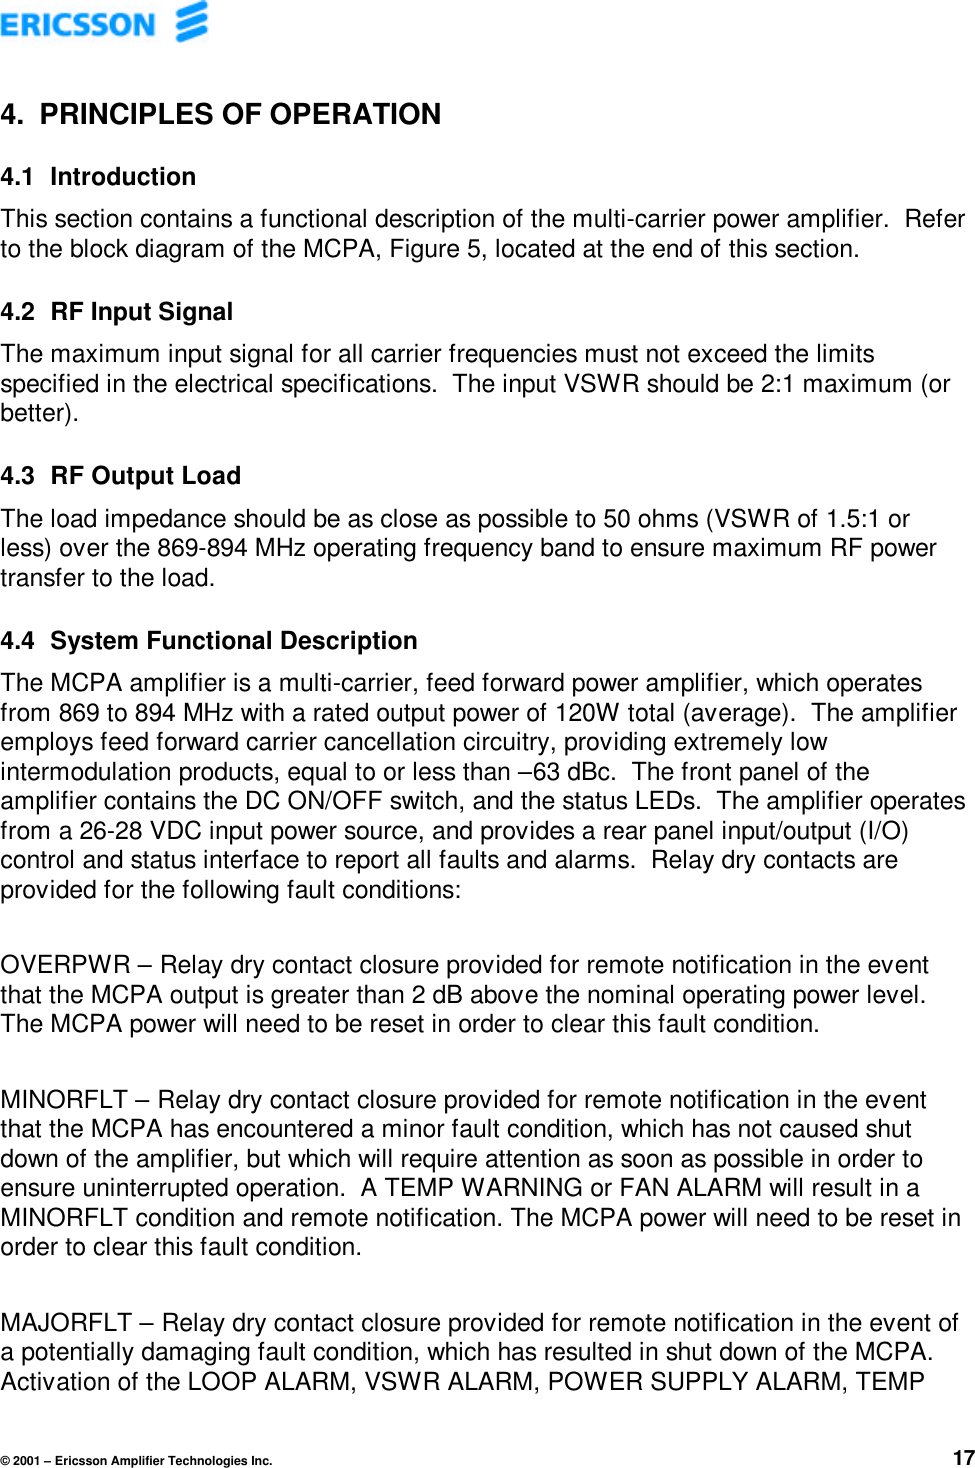 © 2001 – Ericsson Amplifier Technologies Inc. 174. PRINCIPLES OF OPERATION4.1  IntroductionThis section contains a functional description of the multi-carrier power amplifier.  Referto the block diagram of the MCPA, Figure 5, located at the end of this section.4.2  RF Input SignalThe maximum input signal for all carrier frequencies must not exceed the limitsspecified in the electrical specifications.  The input VSWR should be 2:1 maximum (orbetter).4.3  RF Output LoadThe load impedance should be as close as possible to 50 ohms (VSWR of 1.5:1 orless) over the 869-894 MHz operating frequency band to ensure maximum RF powertransfer to the load.4.4  System Functional DescriptionThe MCPA amplifier is a multi-carrier, feed forward power amplifier, which operatesfrom 869 to 894 MHz with a rated output power of 120W total (average).  The amplifieremploys feed forward carrier cancellation circuitry, providing extremely lowintermodulation products, equal to or less than –63 dBc.  The front panel of theamplifier contains the DC ON/OFF switch, and the status LEDs.  The amplifier operatesfrom a 26-28 VDC input power source, and provides a rear panel input/output (I/O)control and status interface to report all faults and alarms.  Relay dry contacts areprovided for the following fault conditions:OVERPWR – Relay dry contact closure provided for remote notification in the eventthat the MCPA output is greater than 2 dB above the nominal operating power level.The MCPA power will need to be reset in order to clear this fault condition.MINORFLT – Relay dry contact closure provided for remote notification in the eventthat the MCPA has encountered a minor fault condition, which has not caused shutdown of the amplifier, but which will require attention as soon as possible in order toensure uninterrupted operation.  A TEMP WARNING or FAN ALARM will result in aMINORFLT condition and remote notification. The MCPA power will need to be reset inorder to clear this fault condition.MAJORFLT – Relay dry contact closure provided for remote notification in the event ofa potentially damaging fault condition, which has resulted in shut down of the MCPA.Activation of the LOOP ALARM, VSWR ALARM, POWER SUPPLY ALARM, TEMP